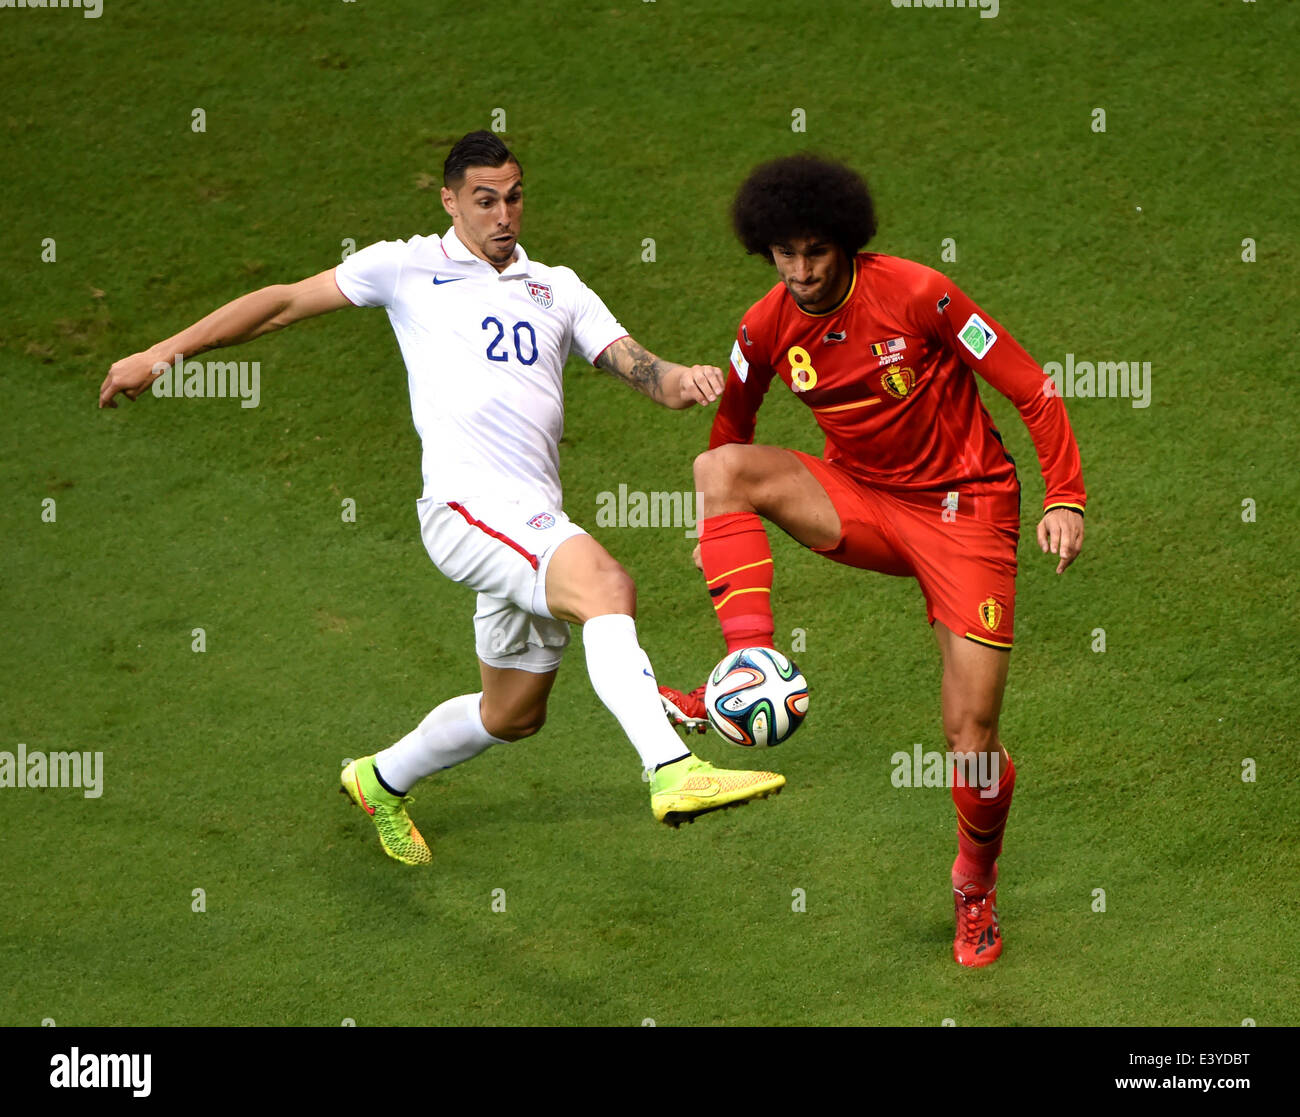 Salvador, Brazil. 1st July, 2014. Belgium's Marouane Fellaini (R) vies with Geoff Cameron of the U.S. during a Round of 16 match between Belgium and the U.S. of 2014 FIFA World Cup at the Arena Fonte Nova Stadium in Salvador, Brazil, on July 1, 2014. Credit:  Guo Yong/Xinhua/Alamy Live News Stock Photo